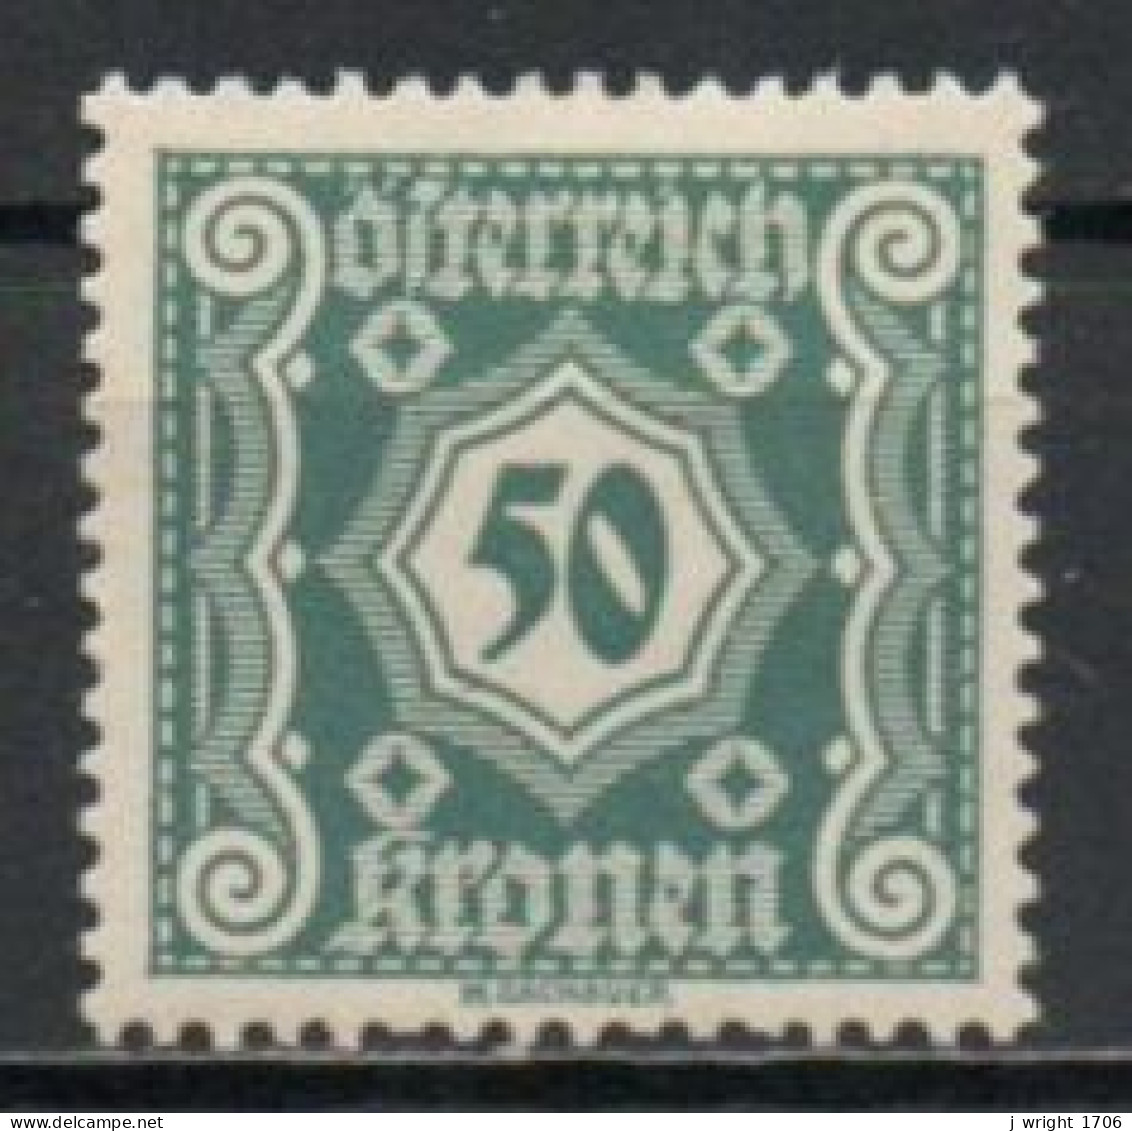 Austria, 1922, Numeral/Small Format, 50kr, MH - Postage Due